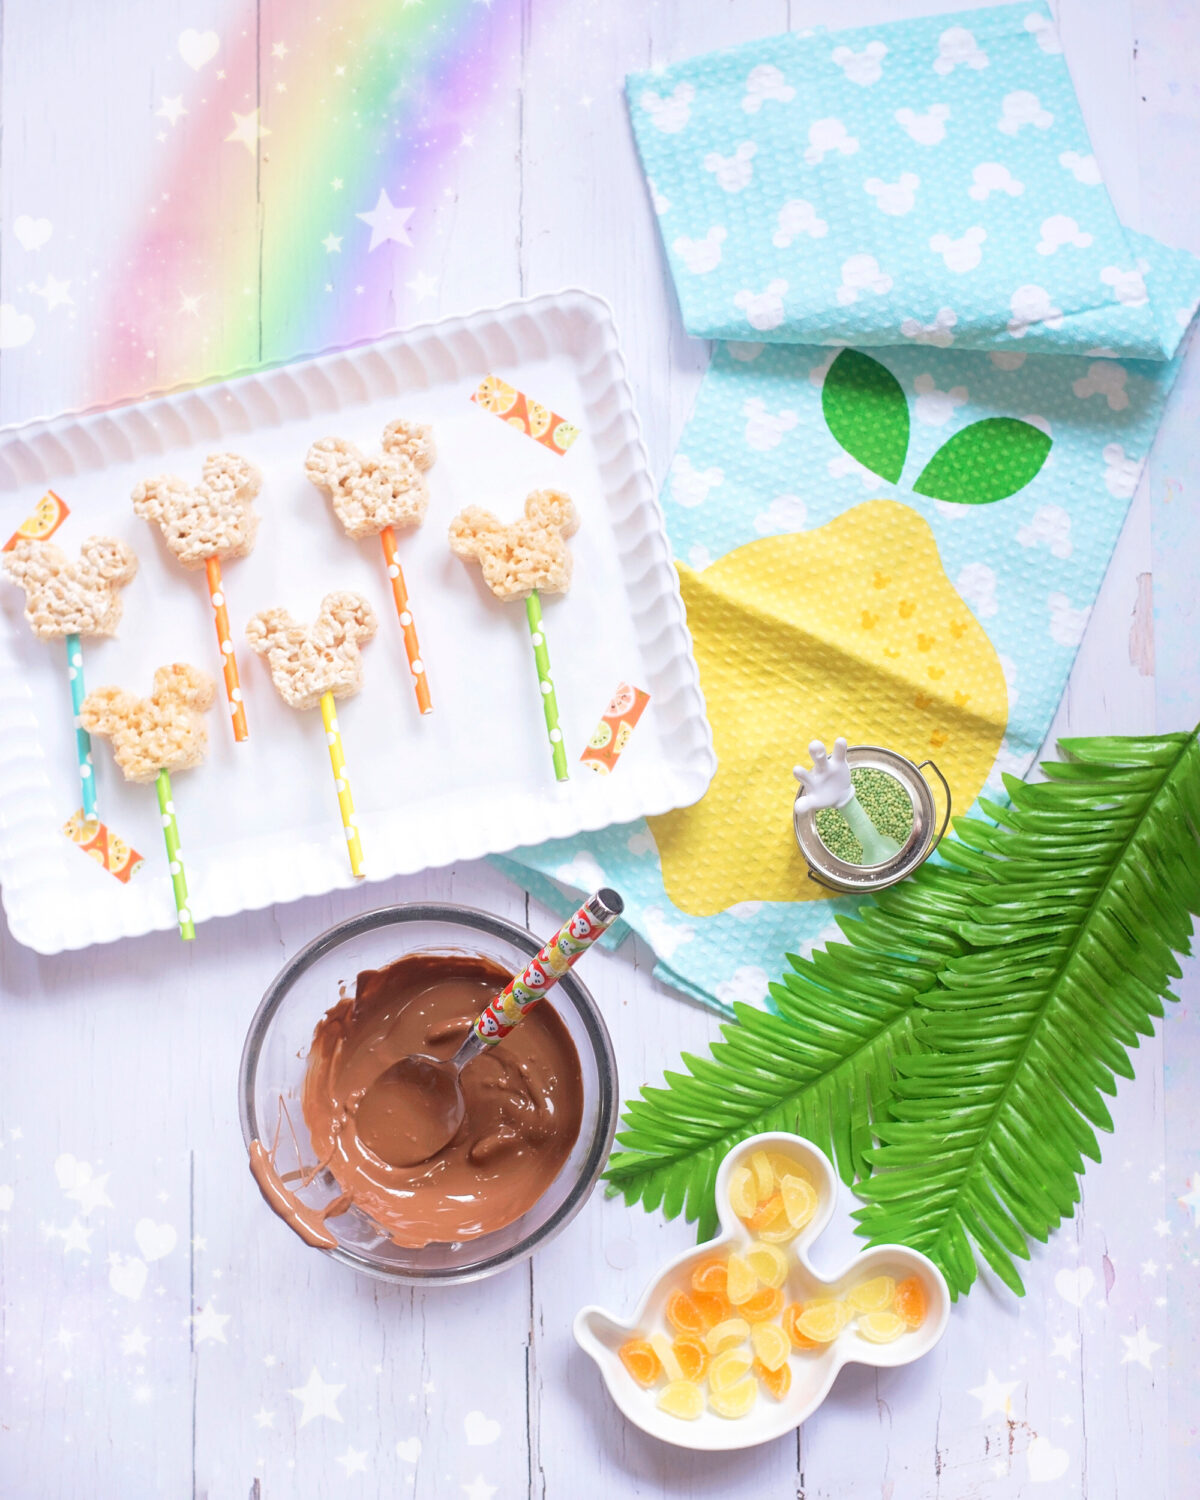 Image shows scalloped tray of summer themed Mickey Mouse Rice Krispie Treats surrounded by orange and lemon slices and tropical leaves, Disney tea towels and Minnie Mouse straws. There is a bowl of melted chocolate ready to dip the Mickey Mouse treats into.